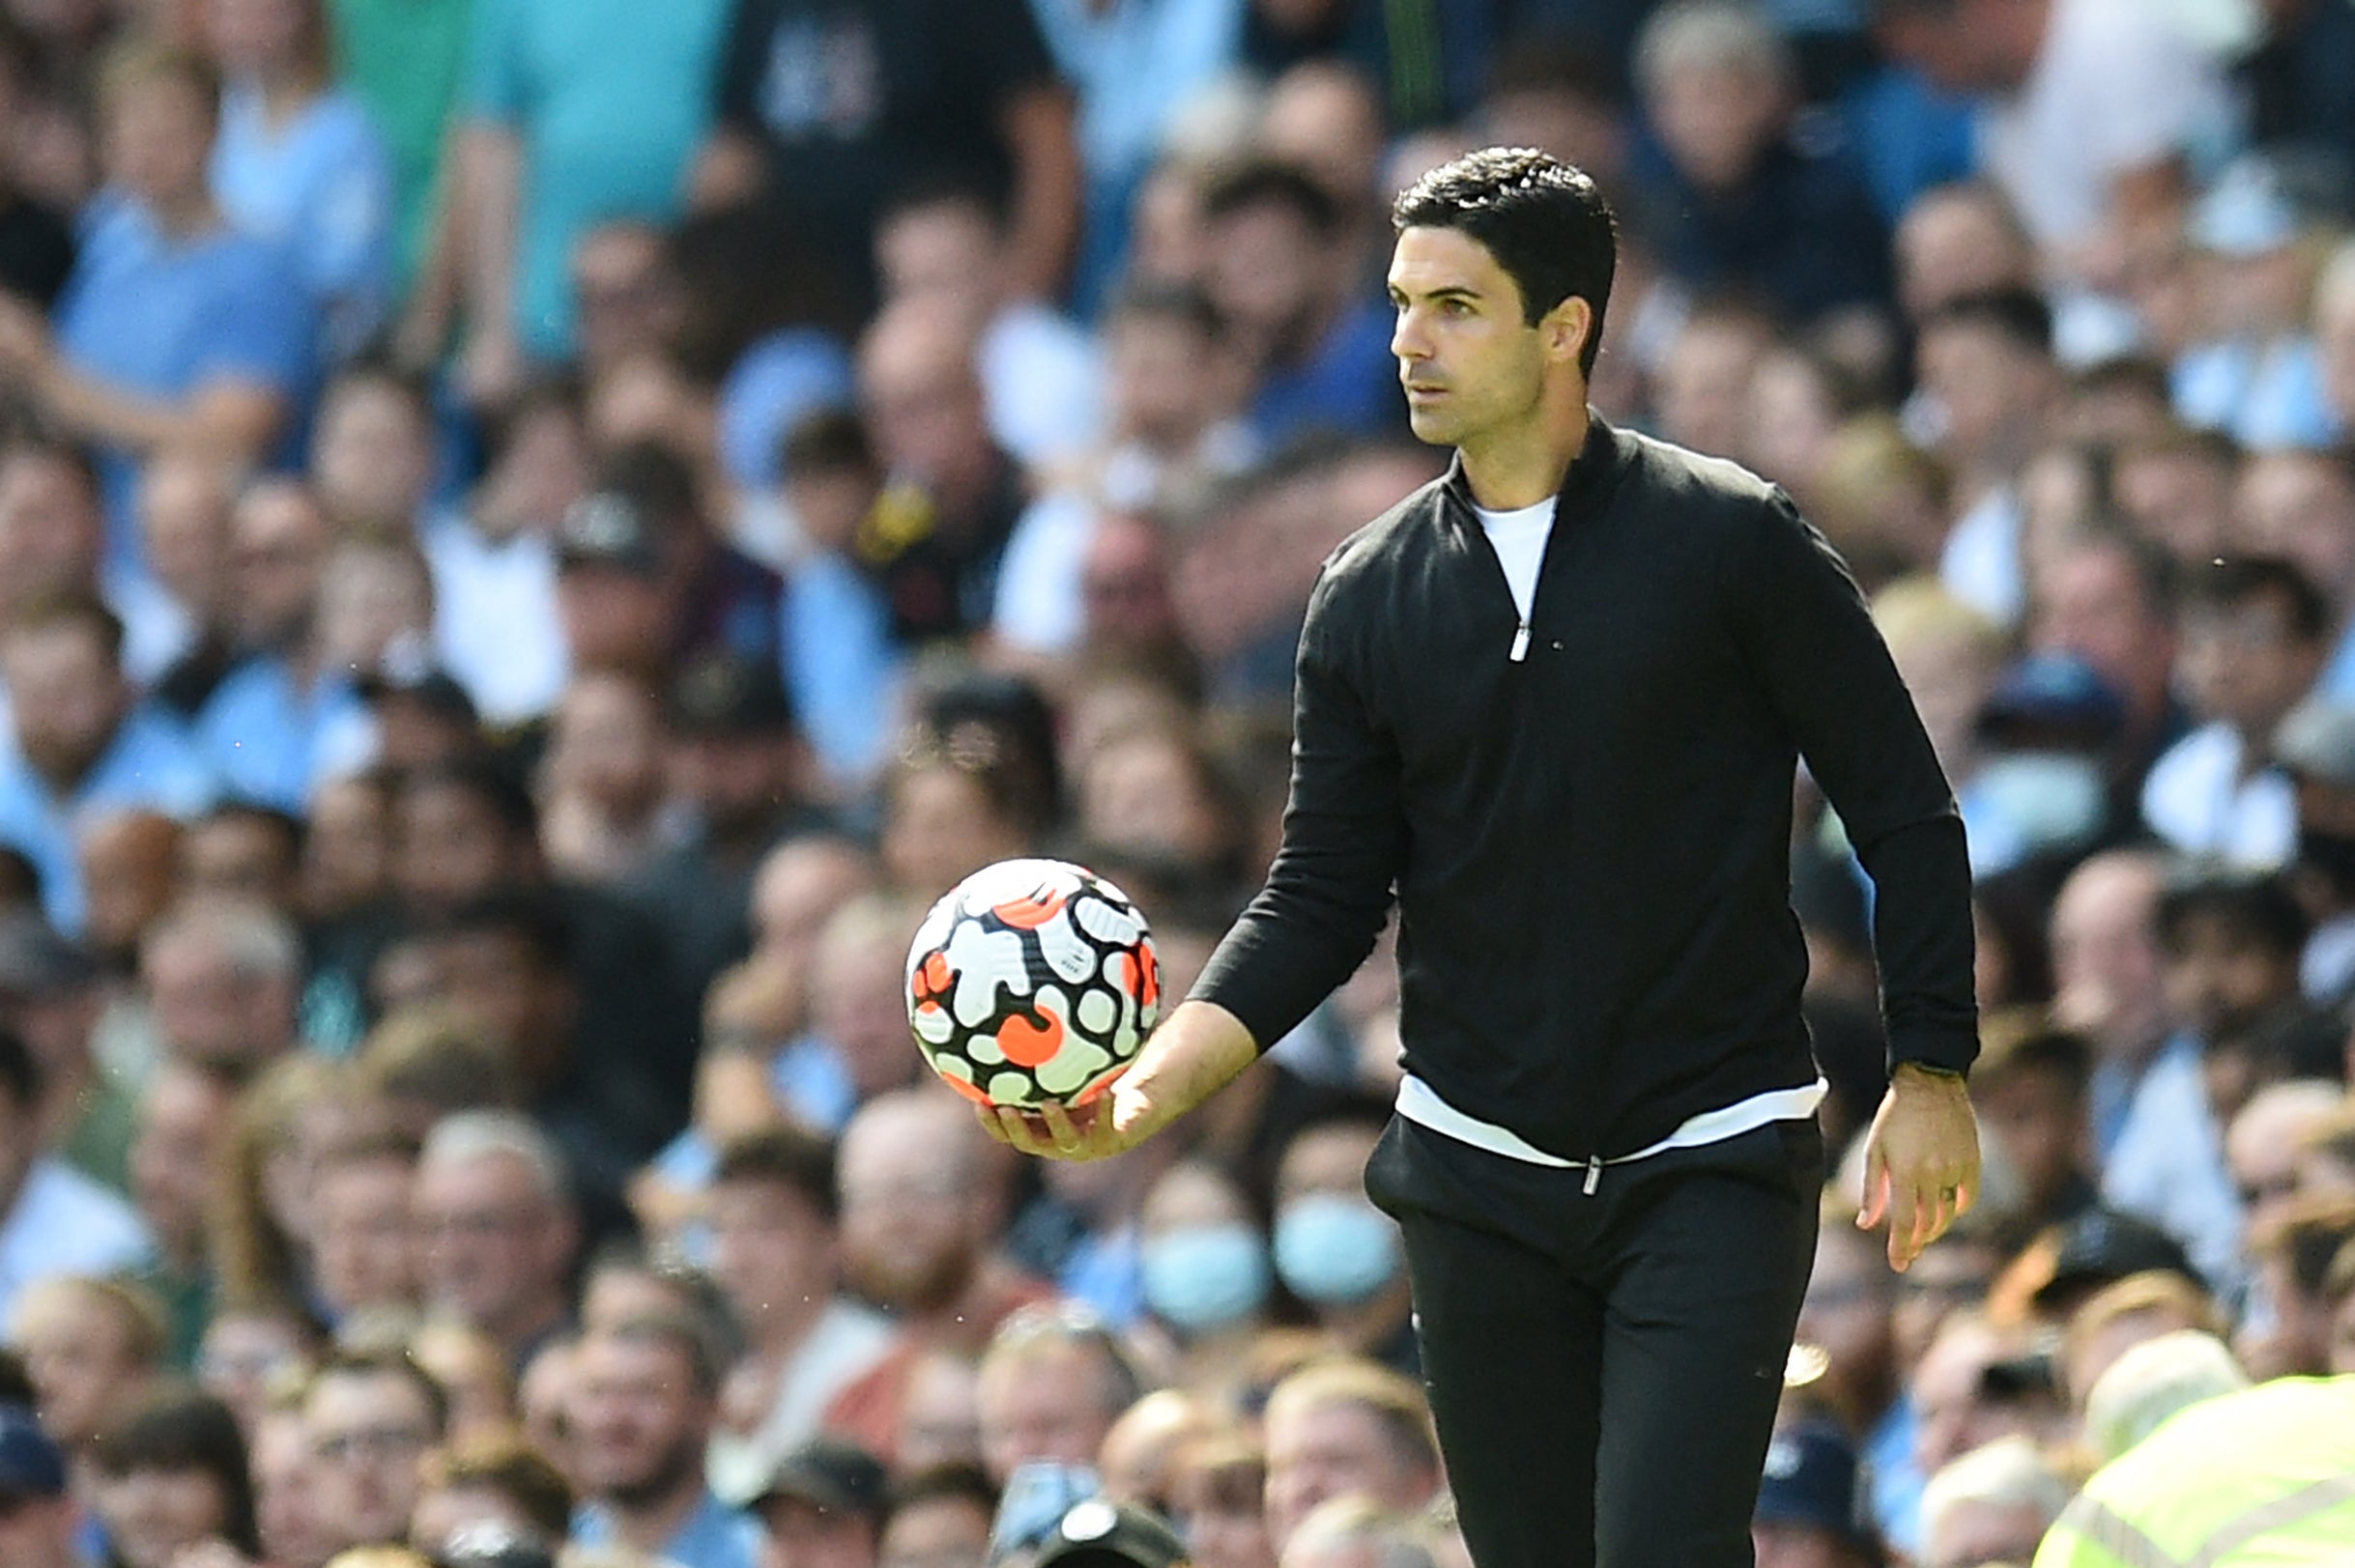 Arsenal manager Mikel Arteta is already under pressure after his side’s poor start